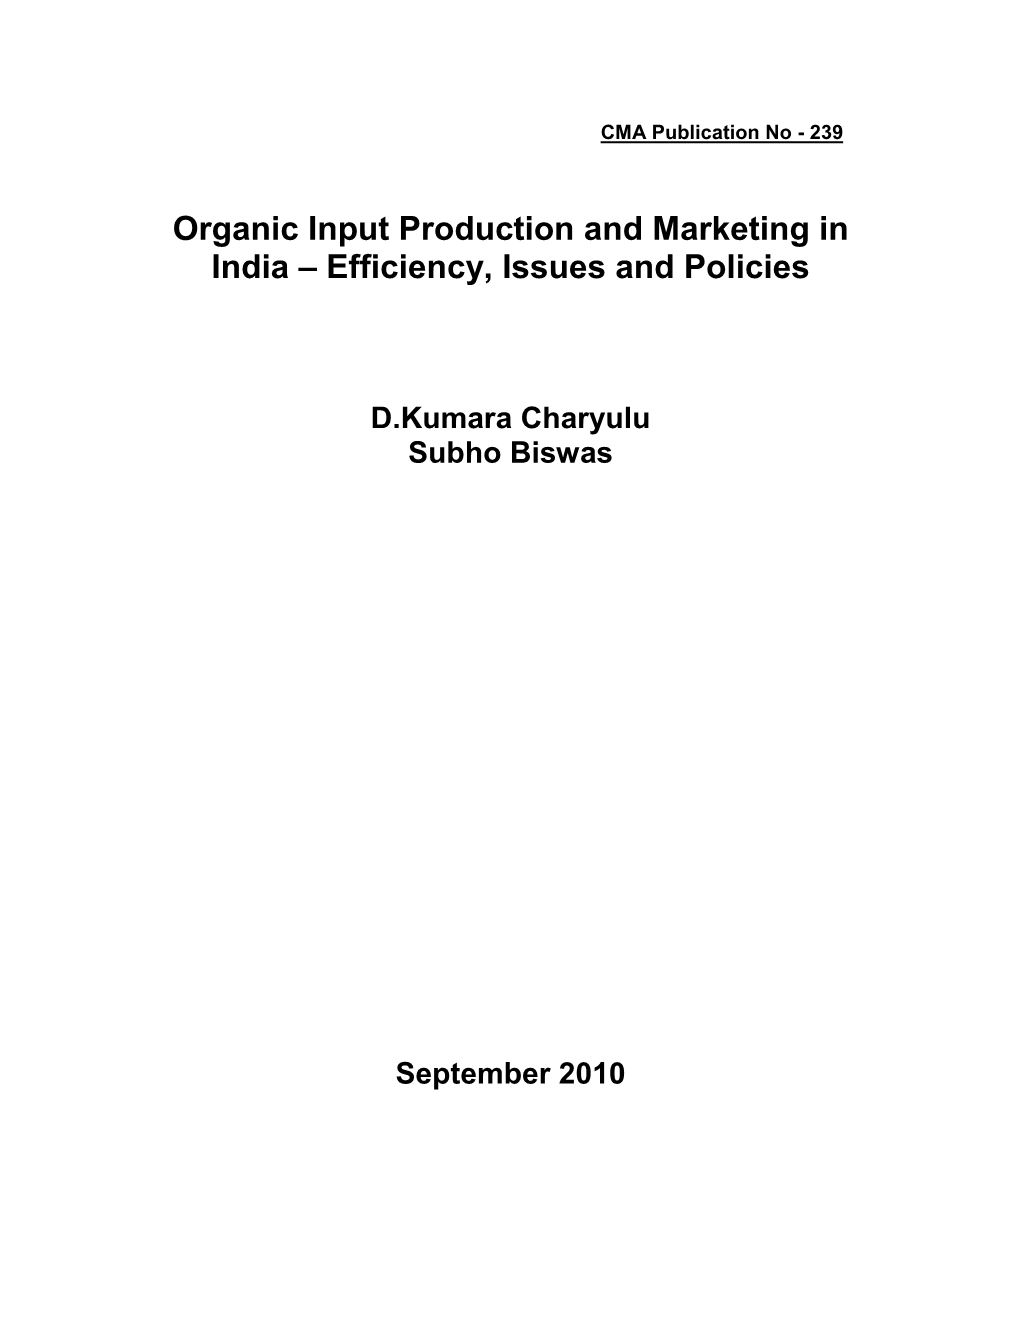 Organic Input Production and Marketing in India – Efficiency, Issues and Policies